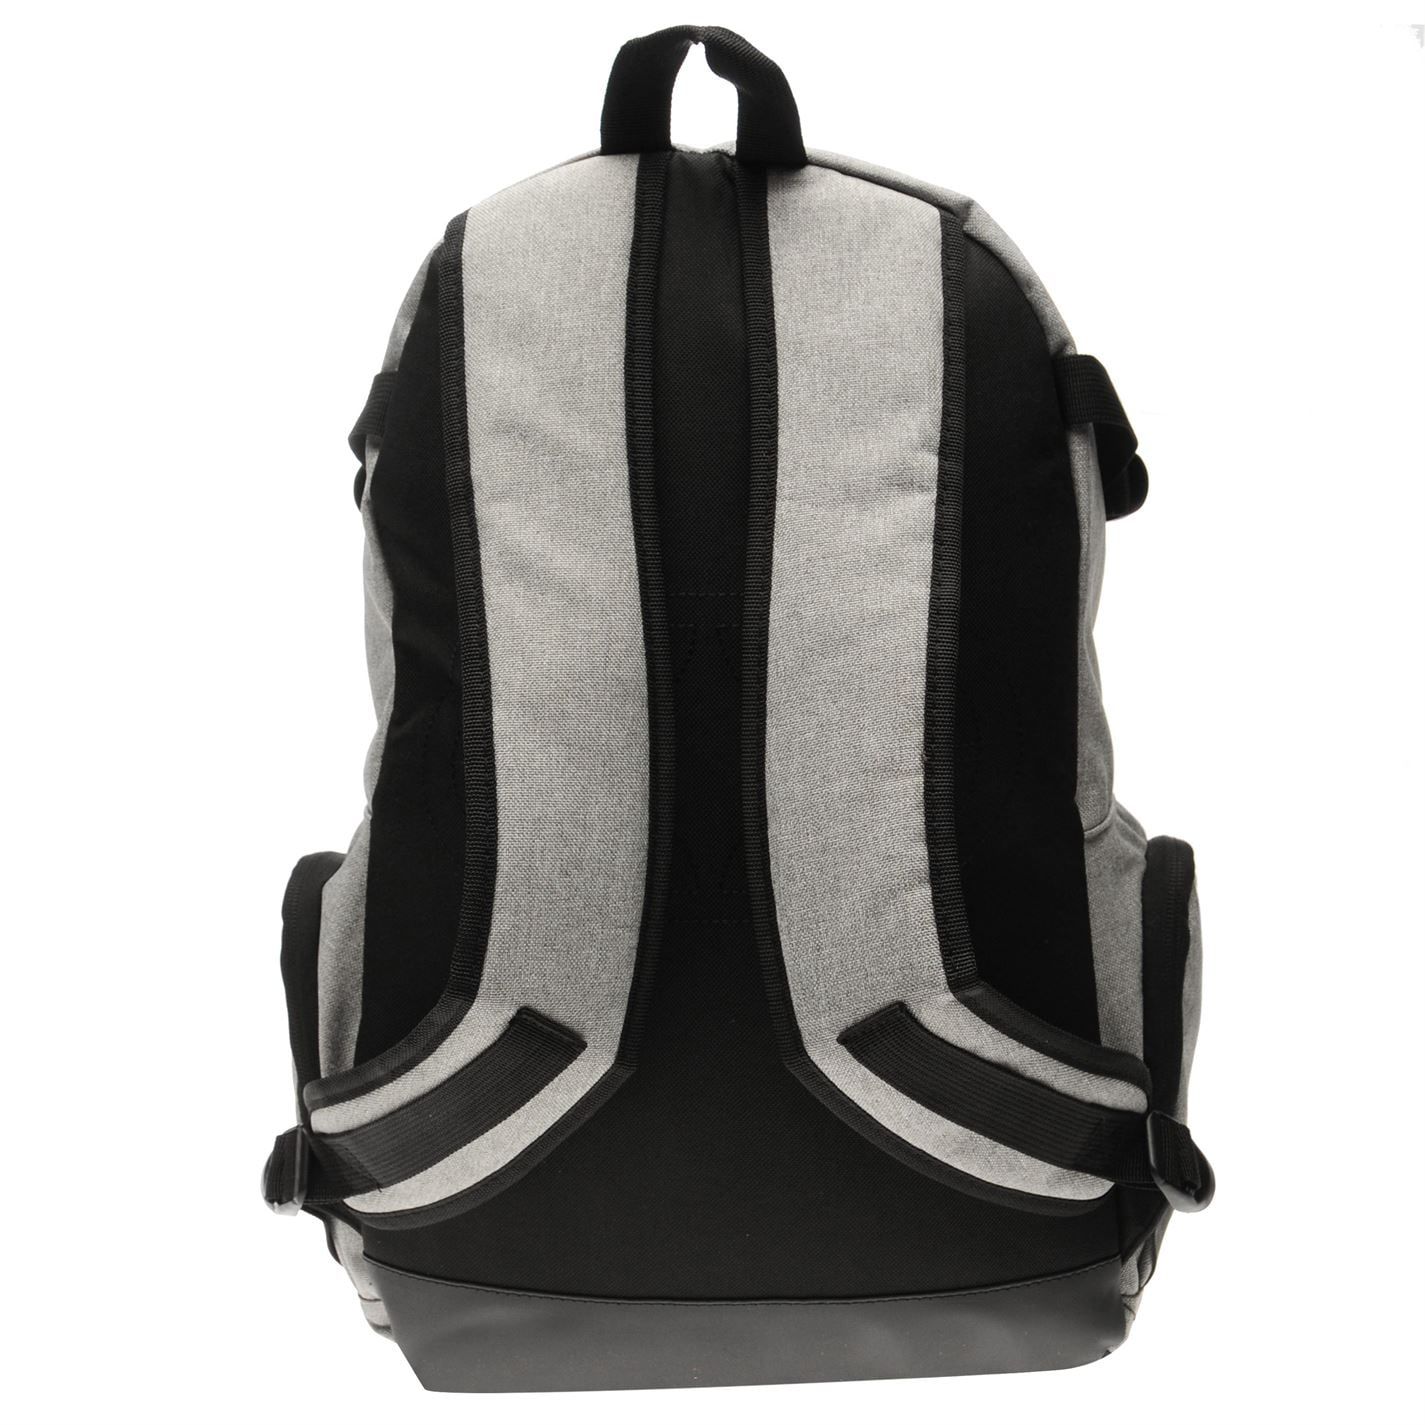 <strong>No Fear Elevate Backpack</strong><br><br> The No Fear Elevate Backpack features a zipped main section with an internal padded laptop sleeve, complete with adjustable and padded shoulder straps for a customisable fit.<br>> Backpack<br>> Zipped main section<br>> Internal laptop sleeve<br>> Inner accessory pocket<br>> 3 front accessory pockets<br>> 2 zipped side accessory pockets<br>> Padded and adjustable shoulder straps<br>> H47 x W29 x D14cm